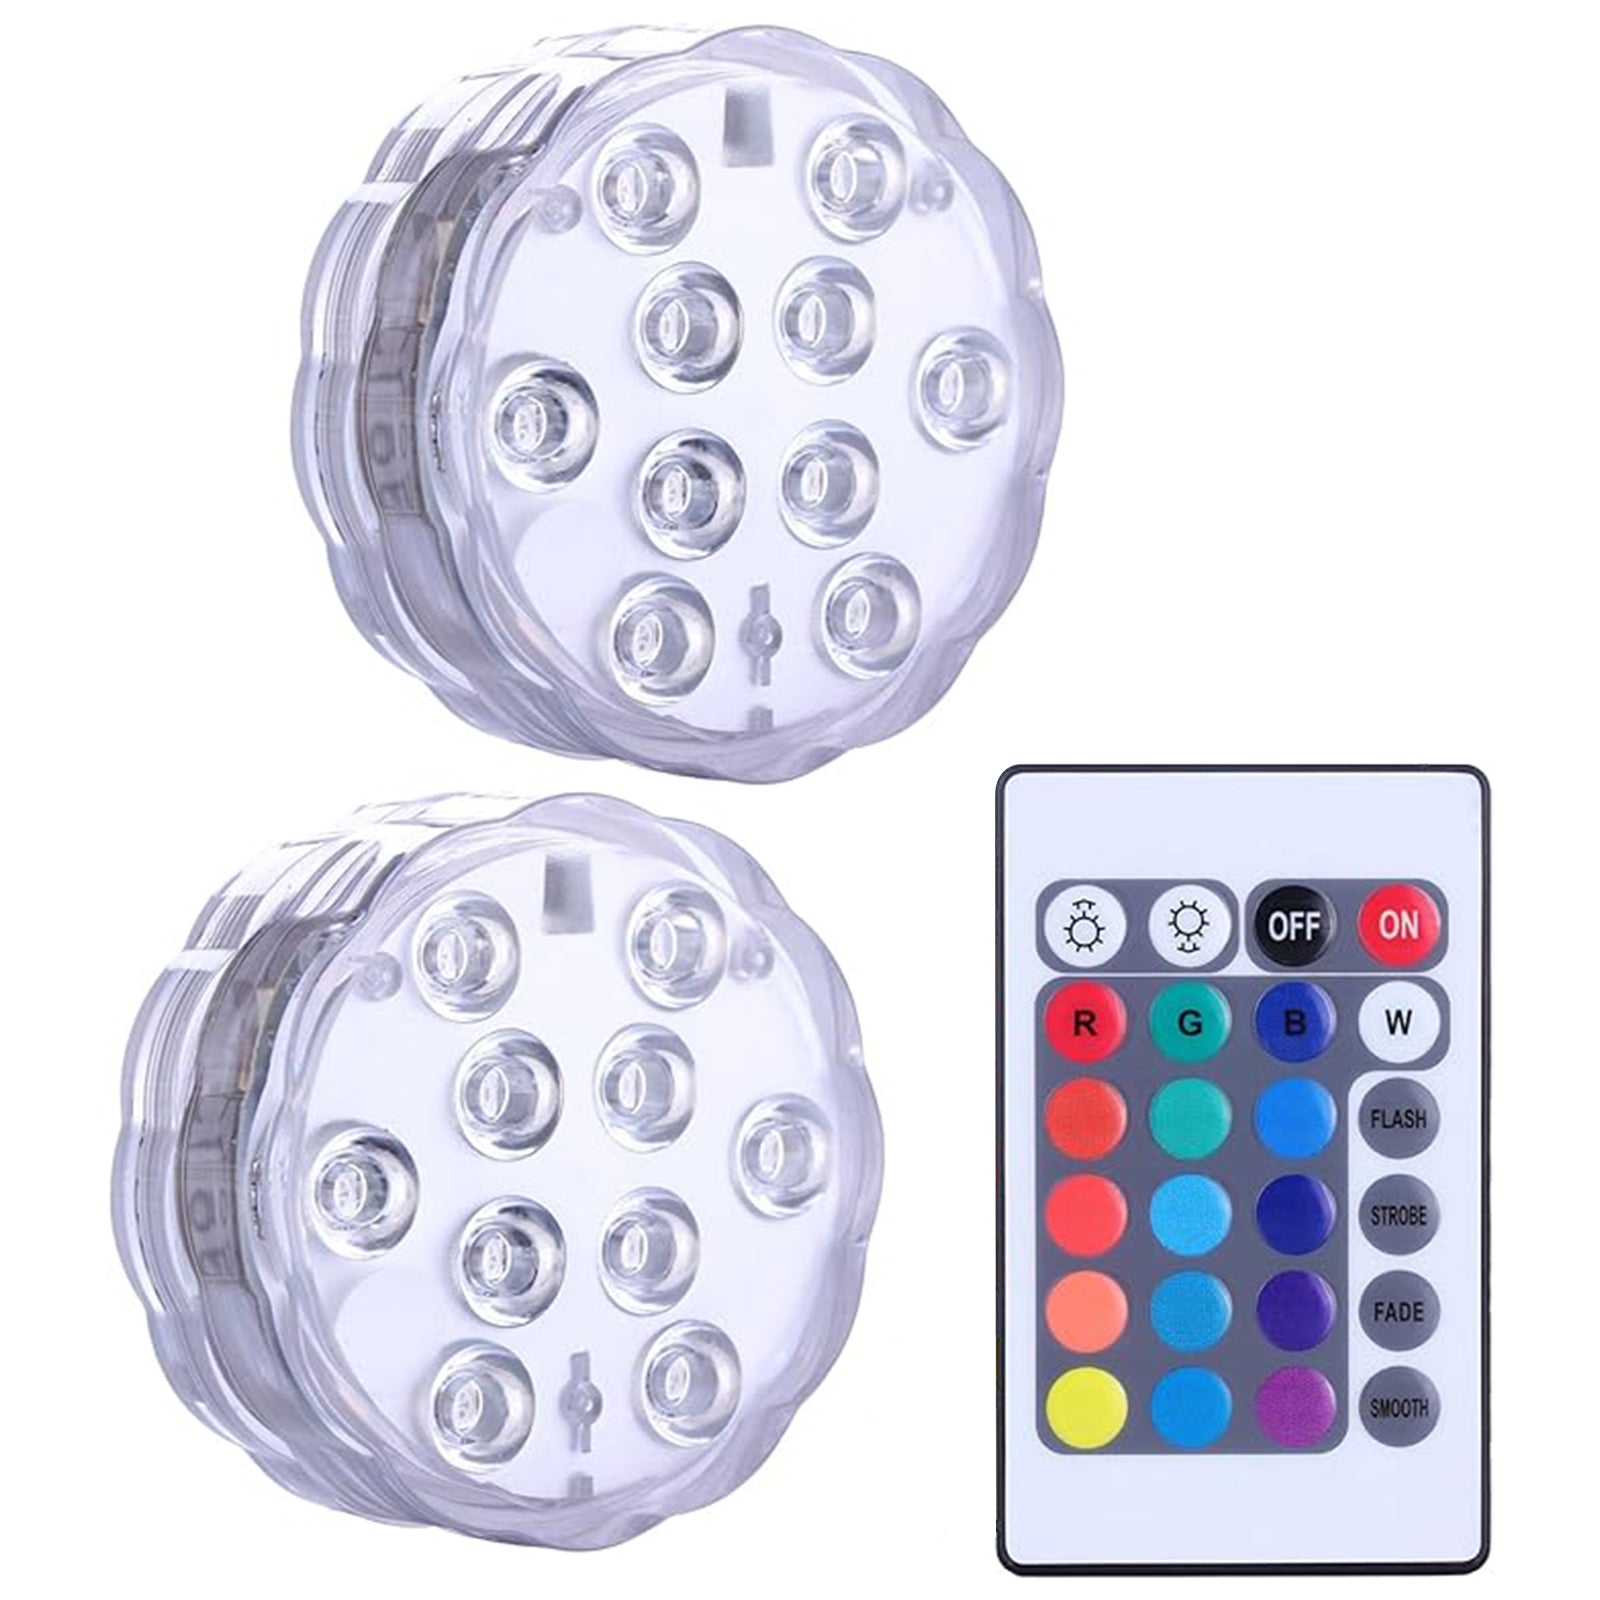 Tropi-Clear LED Pool Lights with Remote,16-Color Waterproof Submersible Pool Light for Pools, Hot Tubs, Decoration and Parties,2-Pack